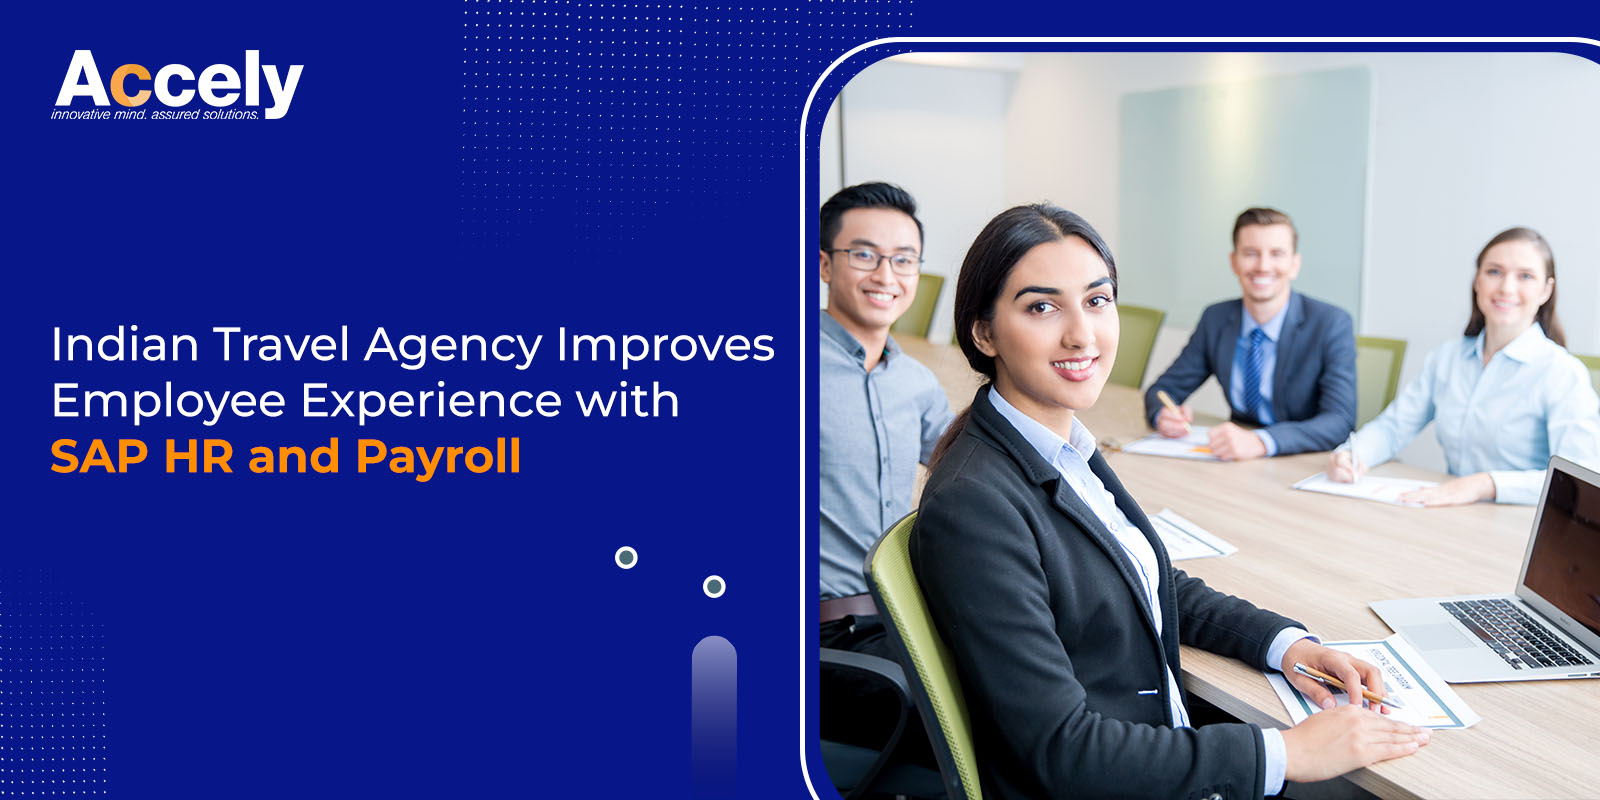 Indian Travel Agency Improves Employee Experience with SAP HR and Payroll